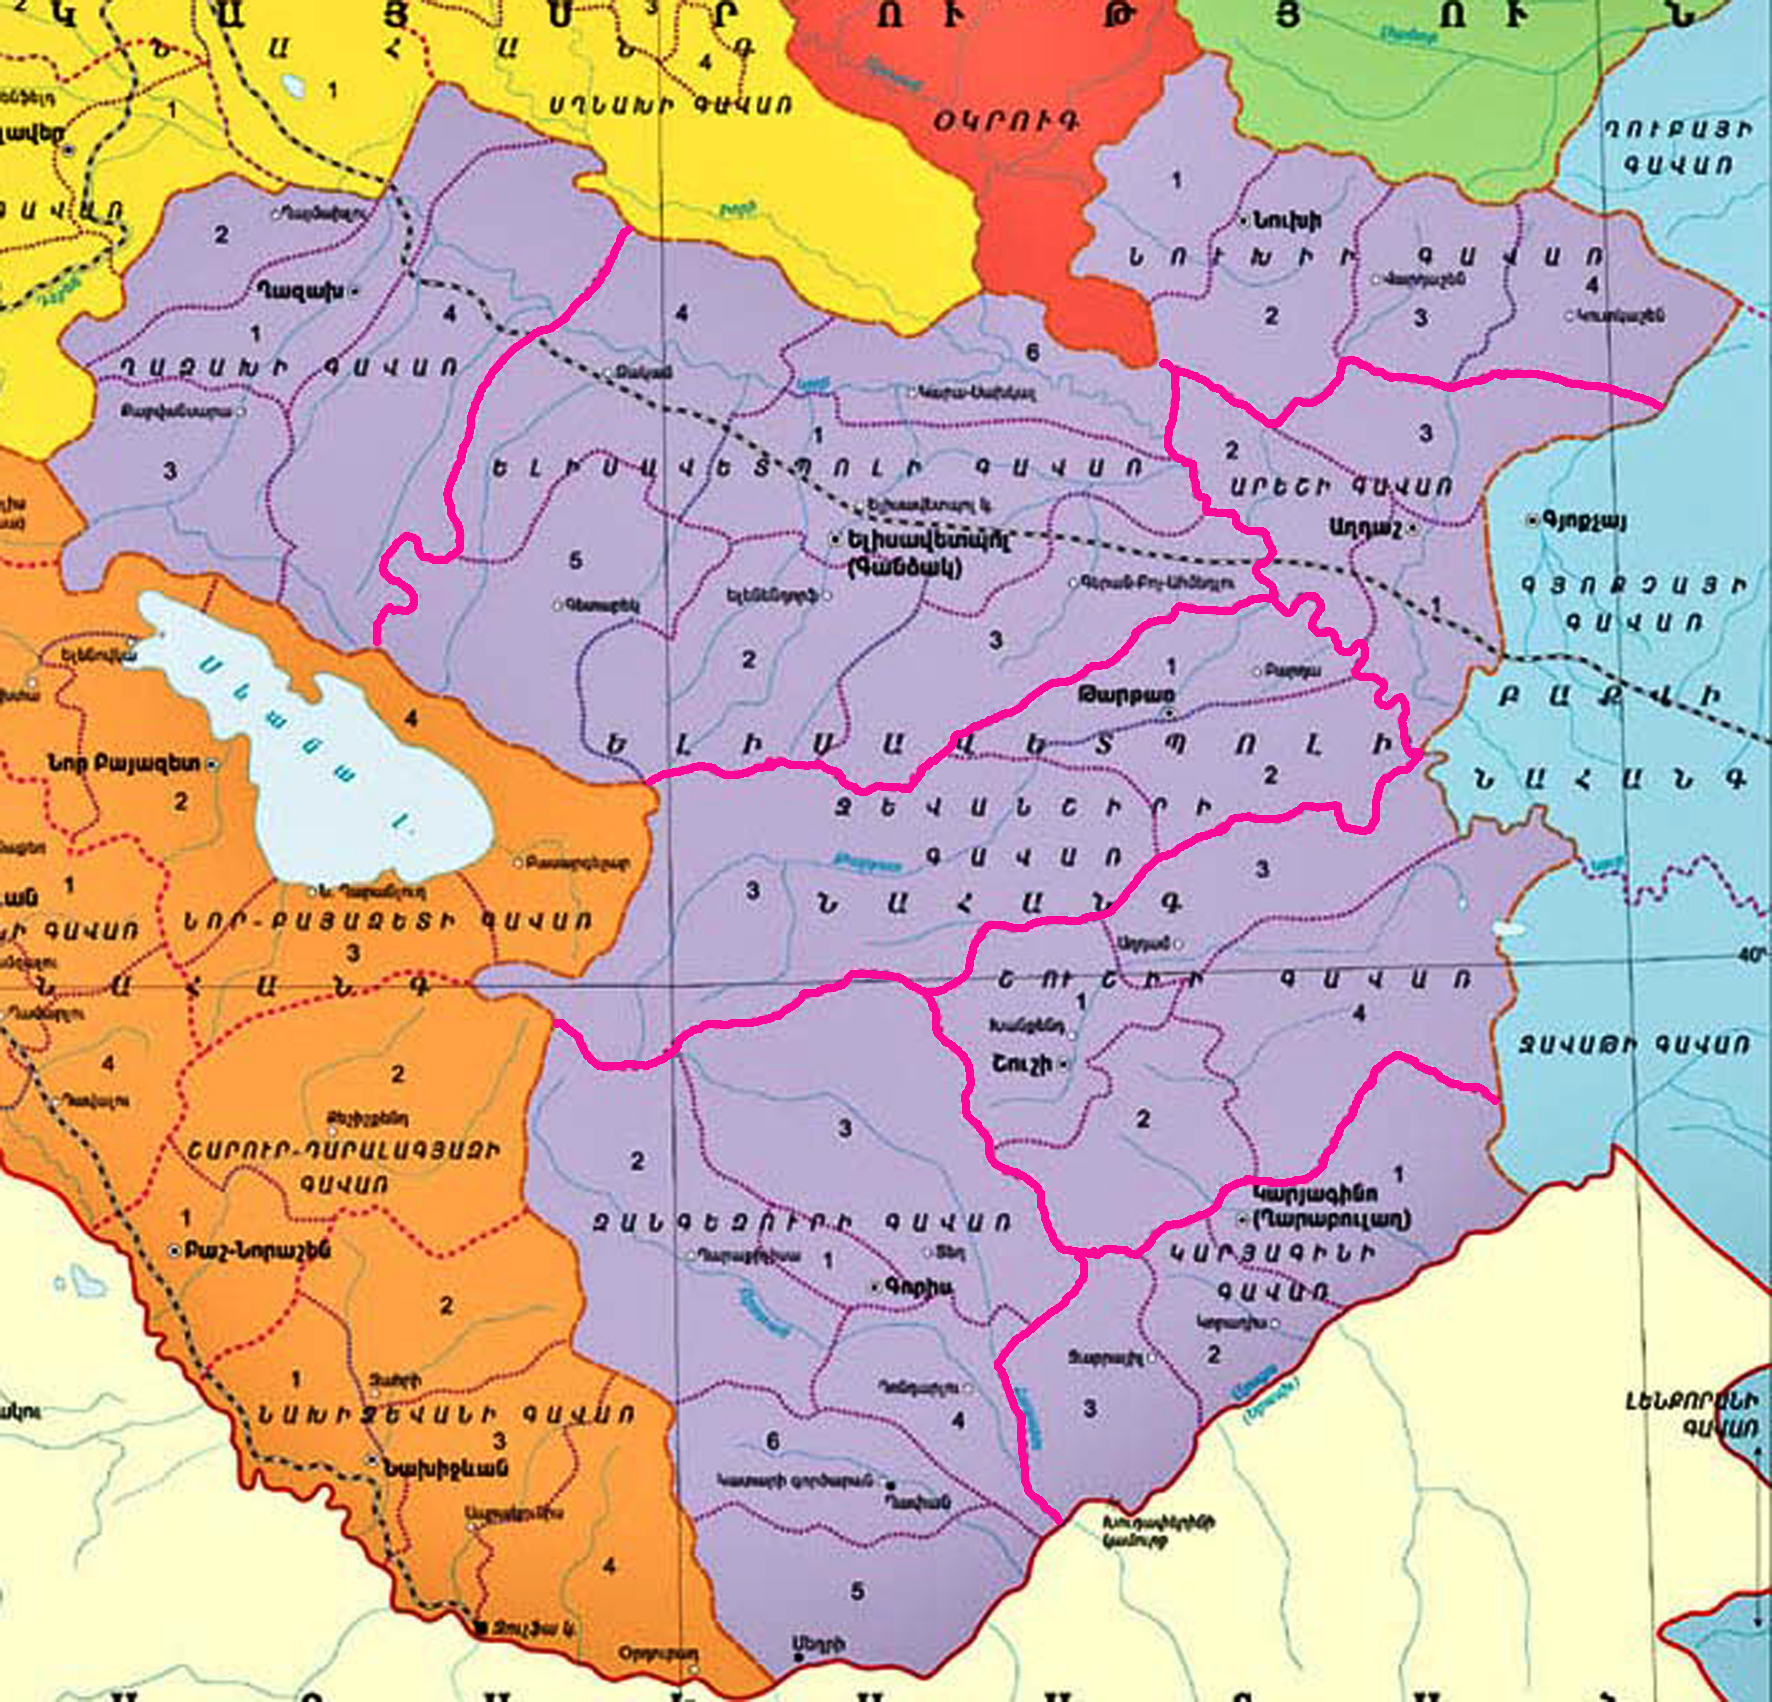 Elizavetpol Province, within which the territory of Artsakh was located